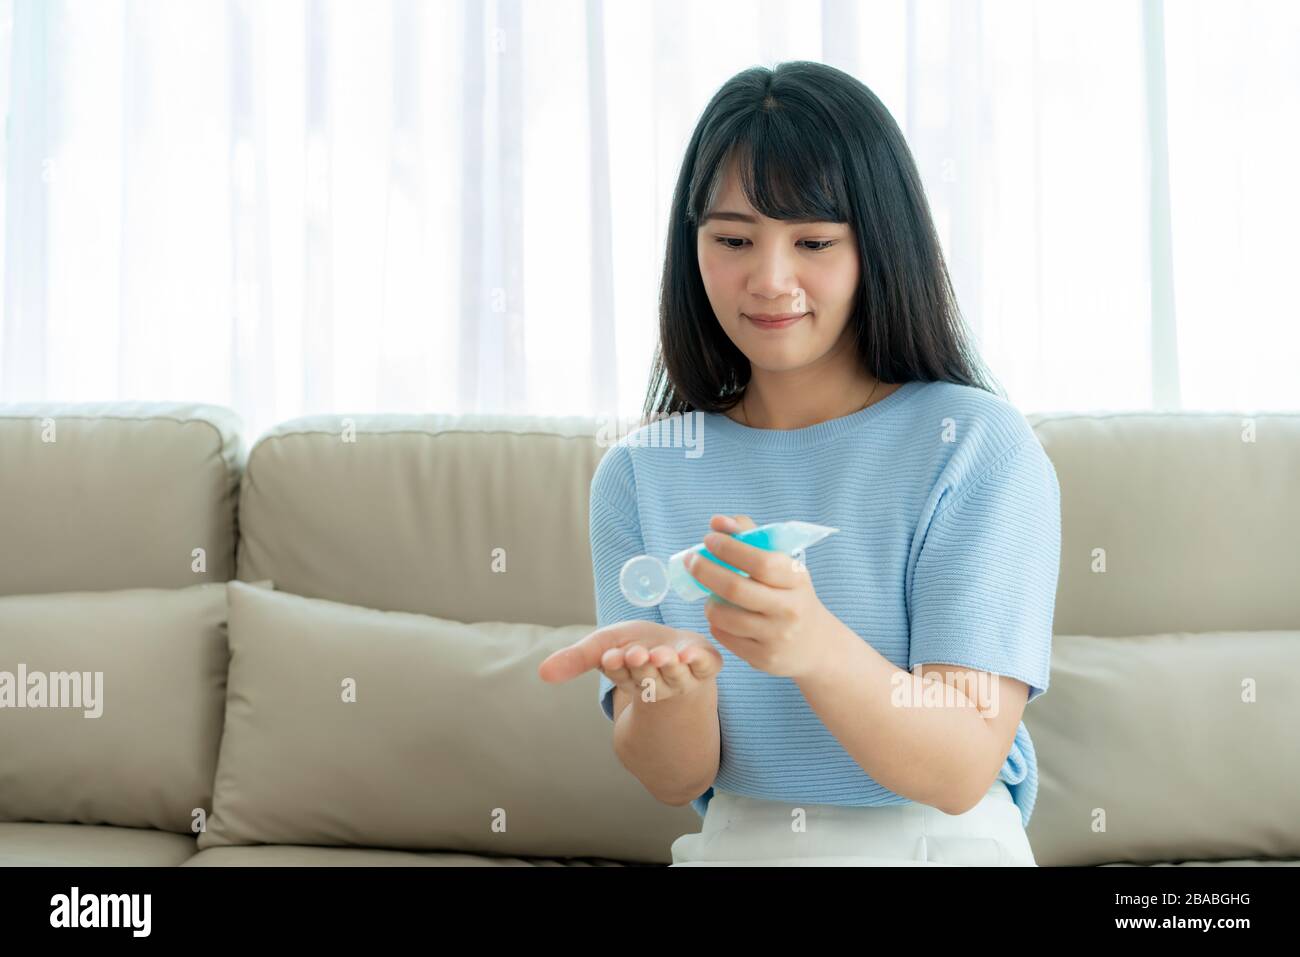 Asian womanl using alcohol antiseptic gel, prevention, cleaning hands frequently, prevent infection, outbreak of Covid-19 wash hands with hand sanitiz Stock Photo